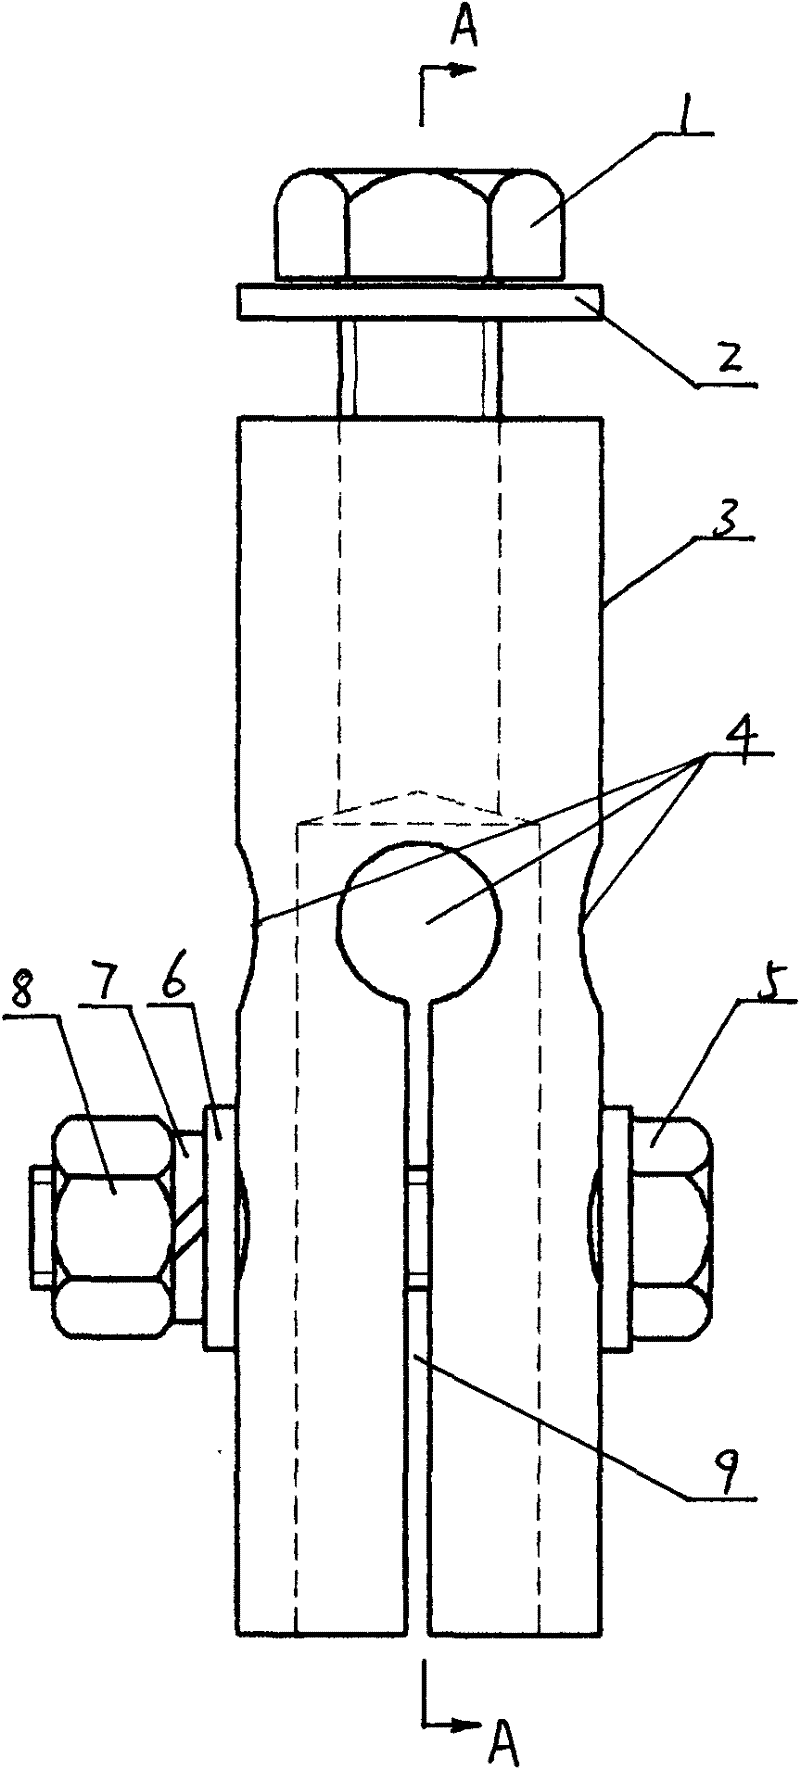 Leading-out connector of anode and cathode terminals of valve-control storage battery